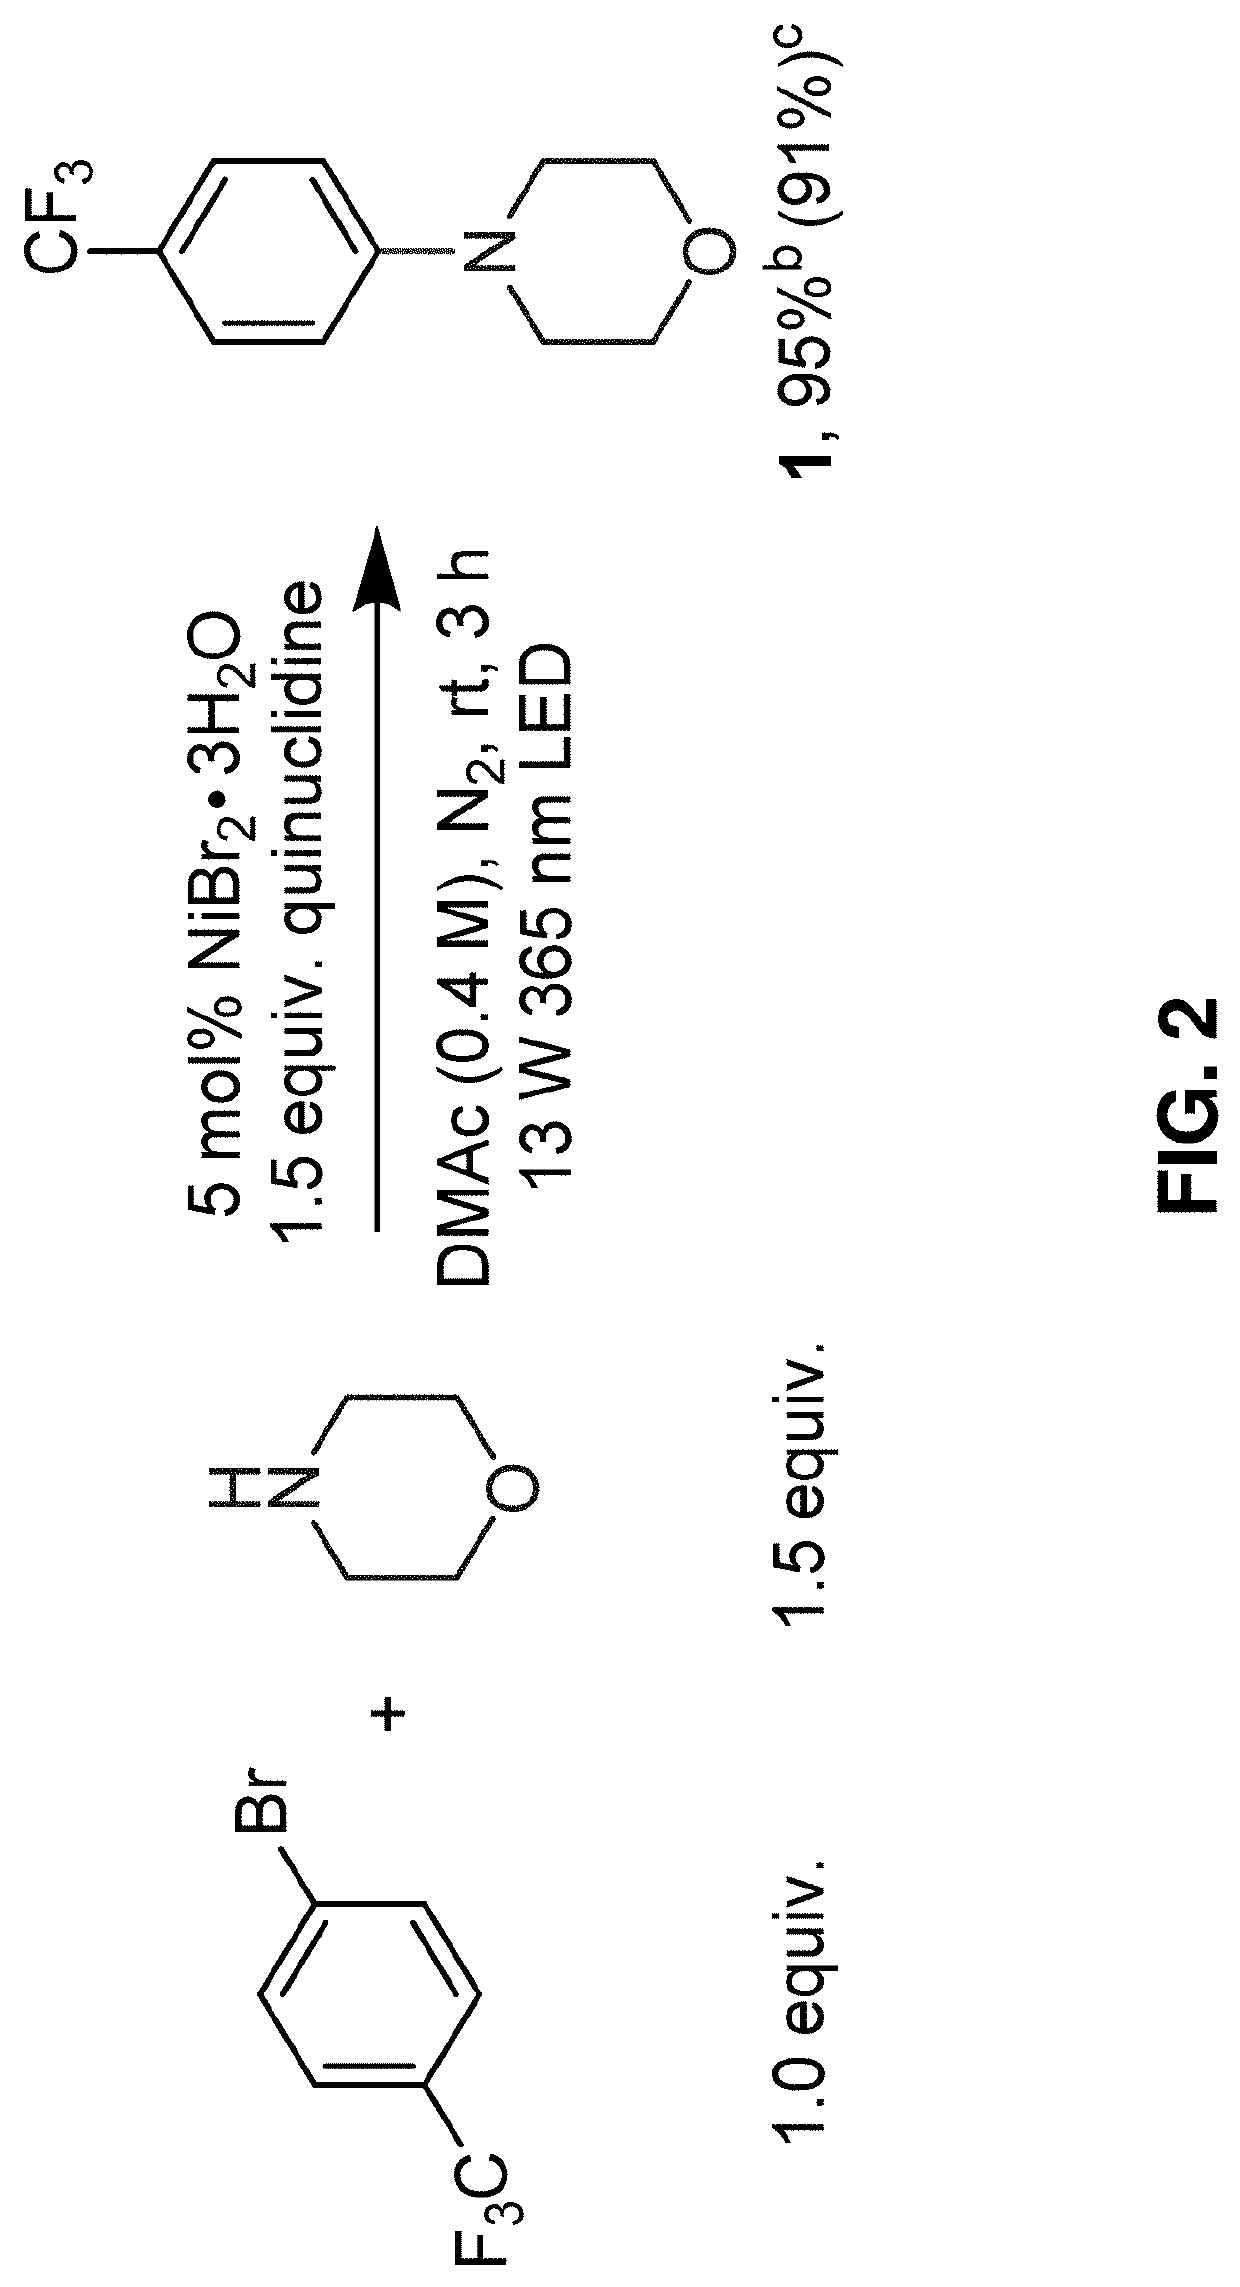 Methods for forming aryl carbon-nitrogen bonds using light and photoreactors useful for conducting such reactions